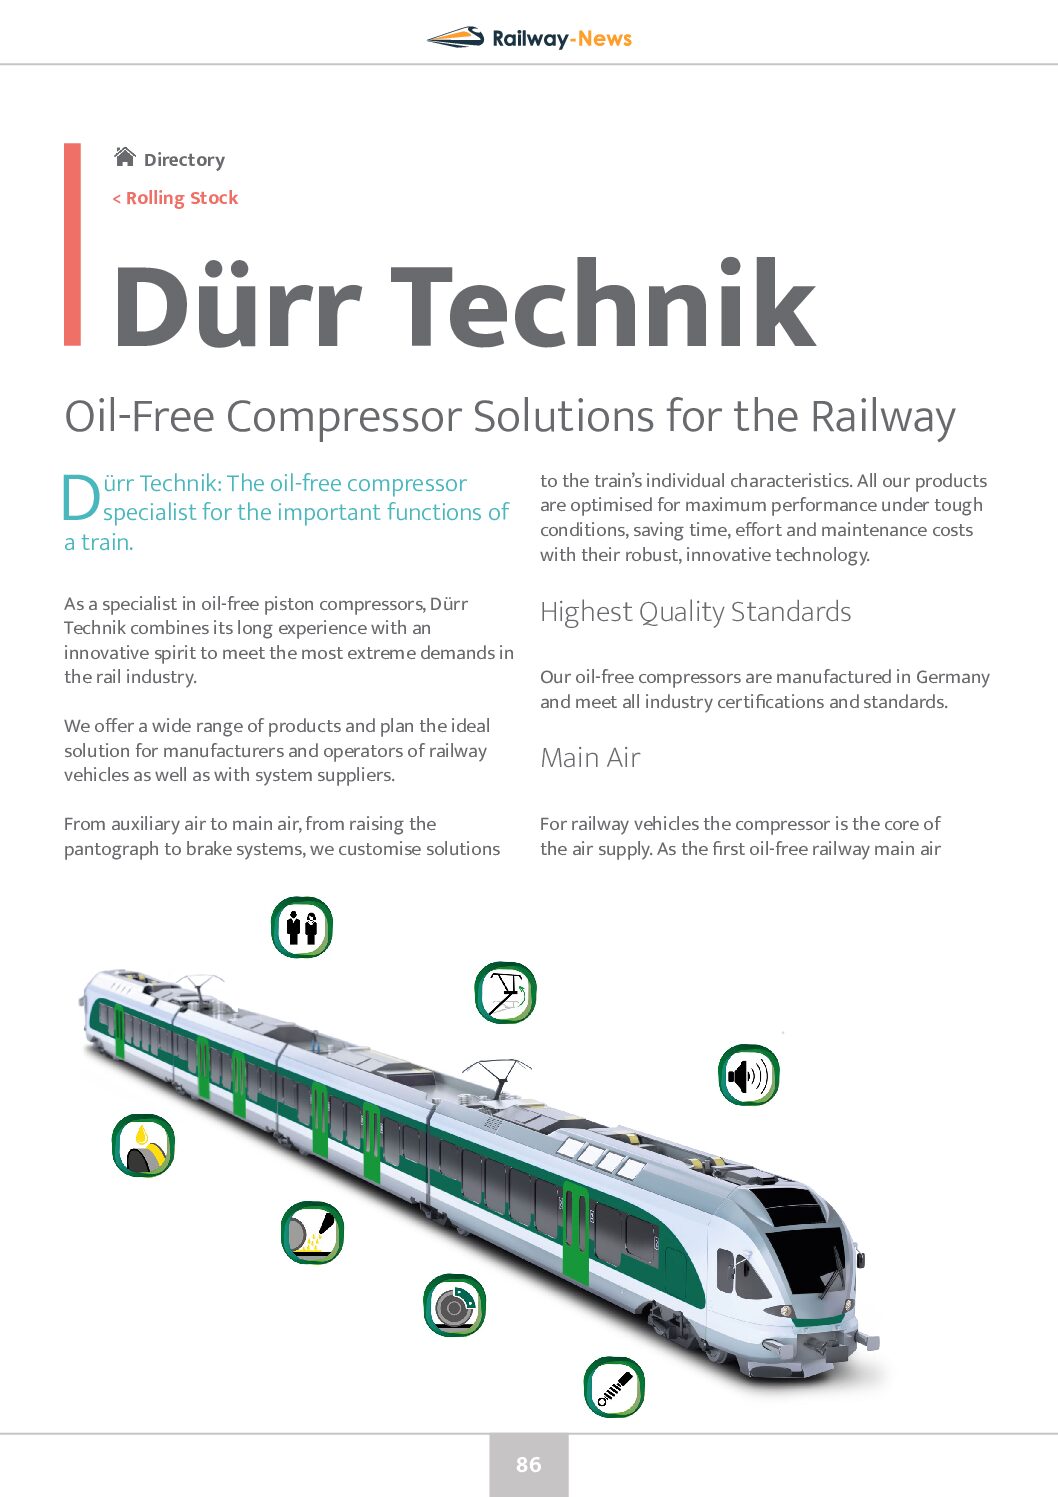 Oil-Free Compressor Solutions for the Railway